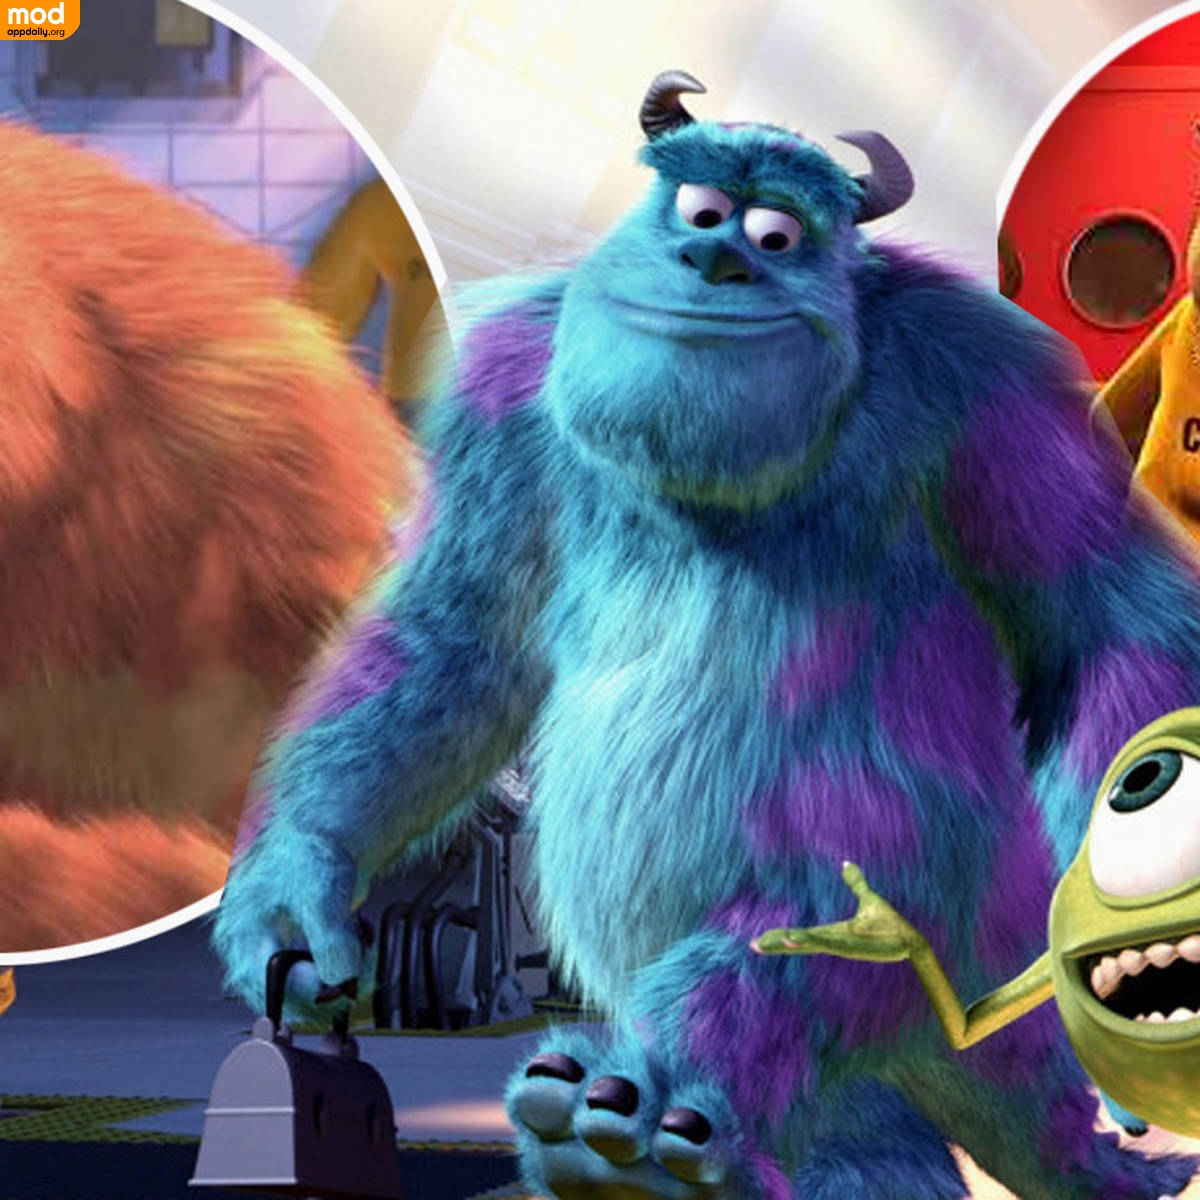 Sullivan - Blue Monster from Monsters Inc is portrayed as being kind-hearted, hardworking, considerate, and self-assured in the movie Monsters, Inc